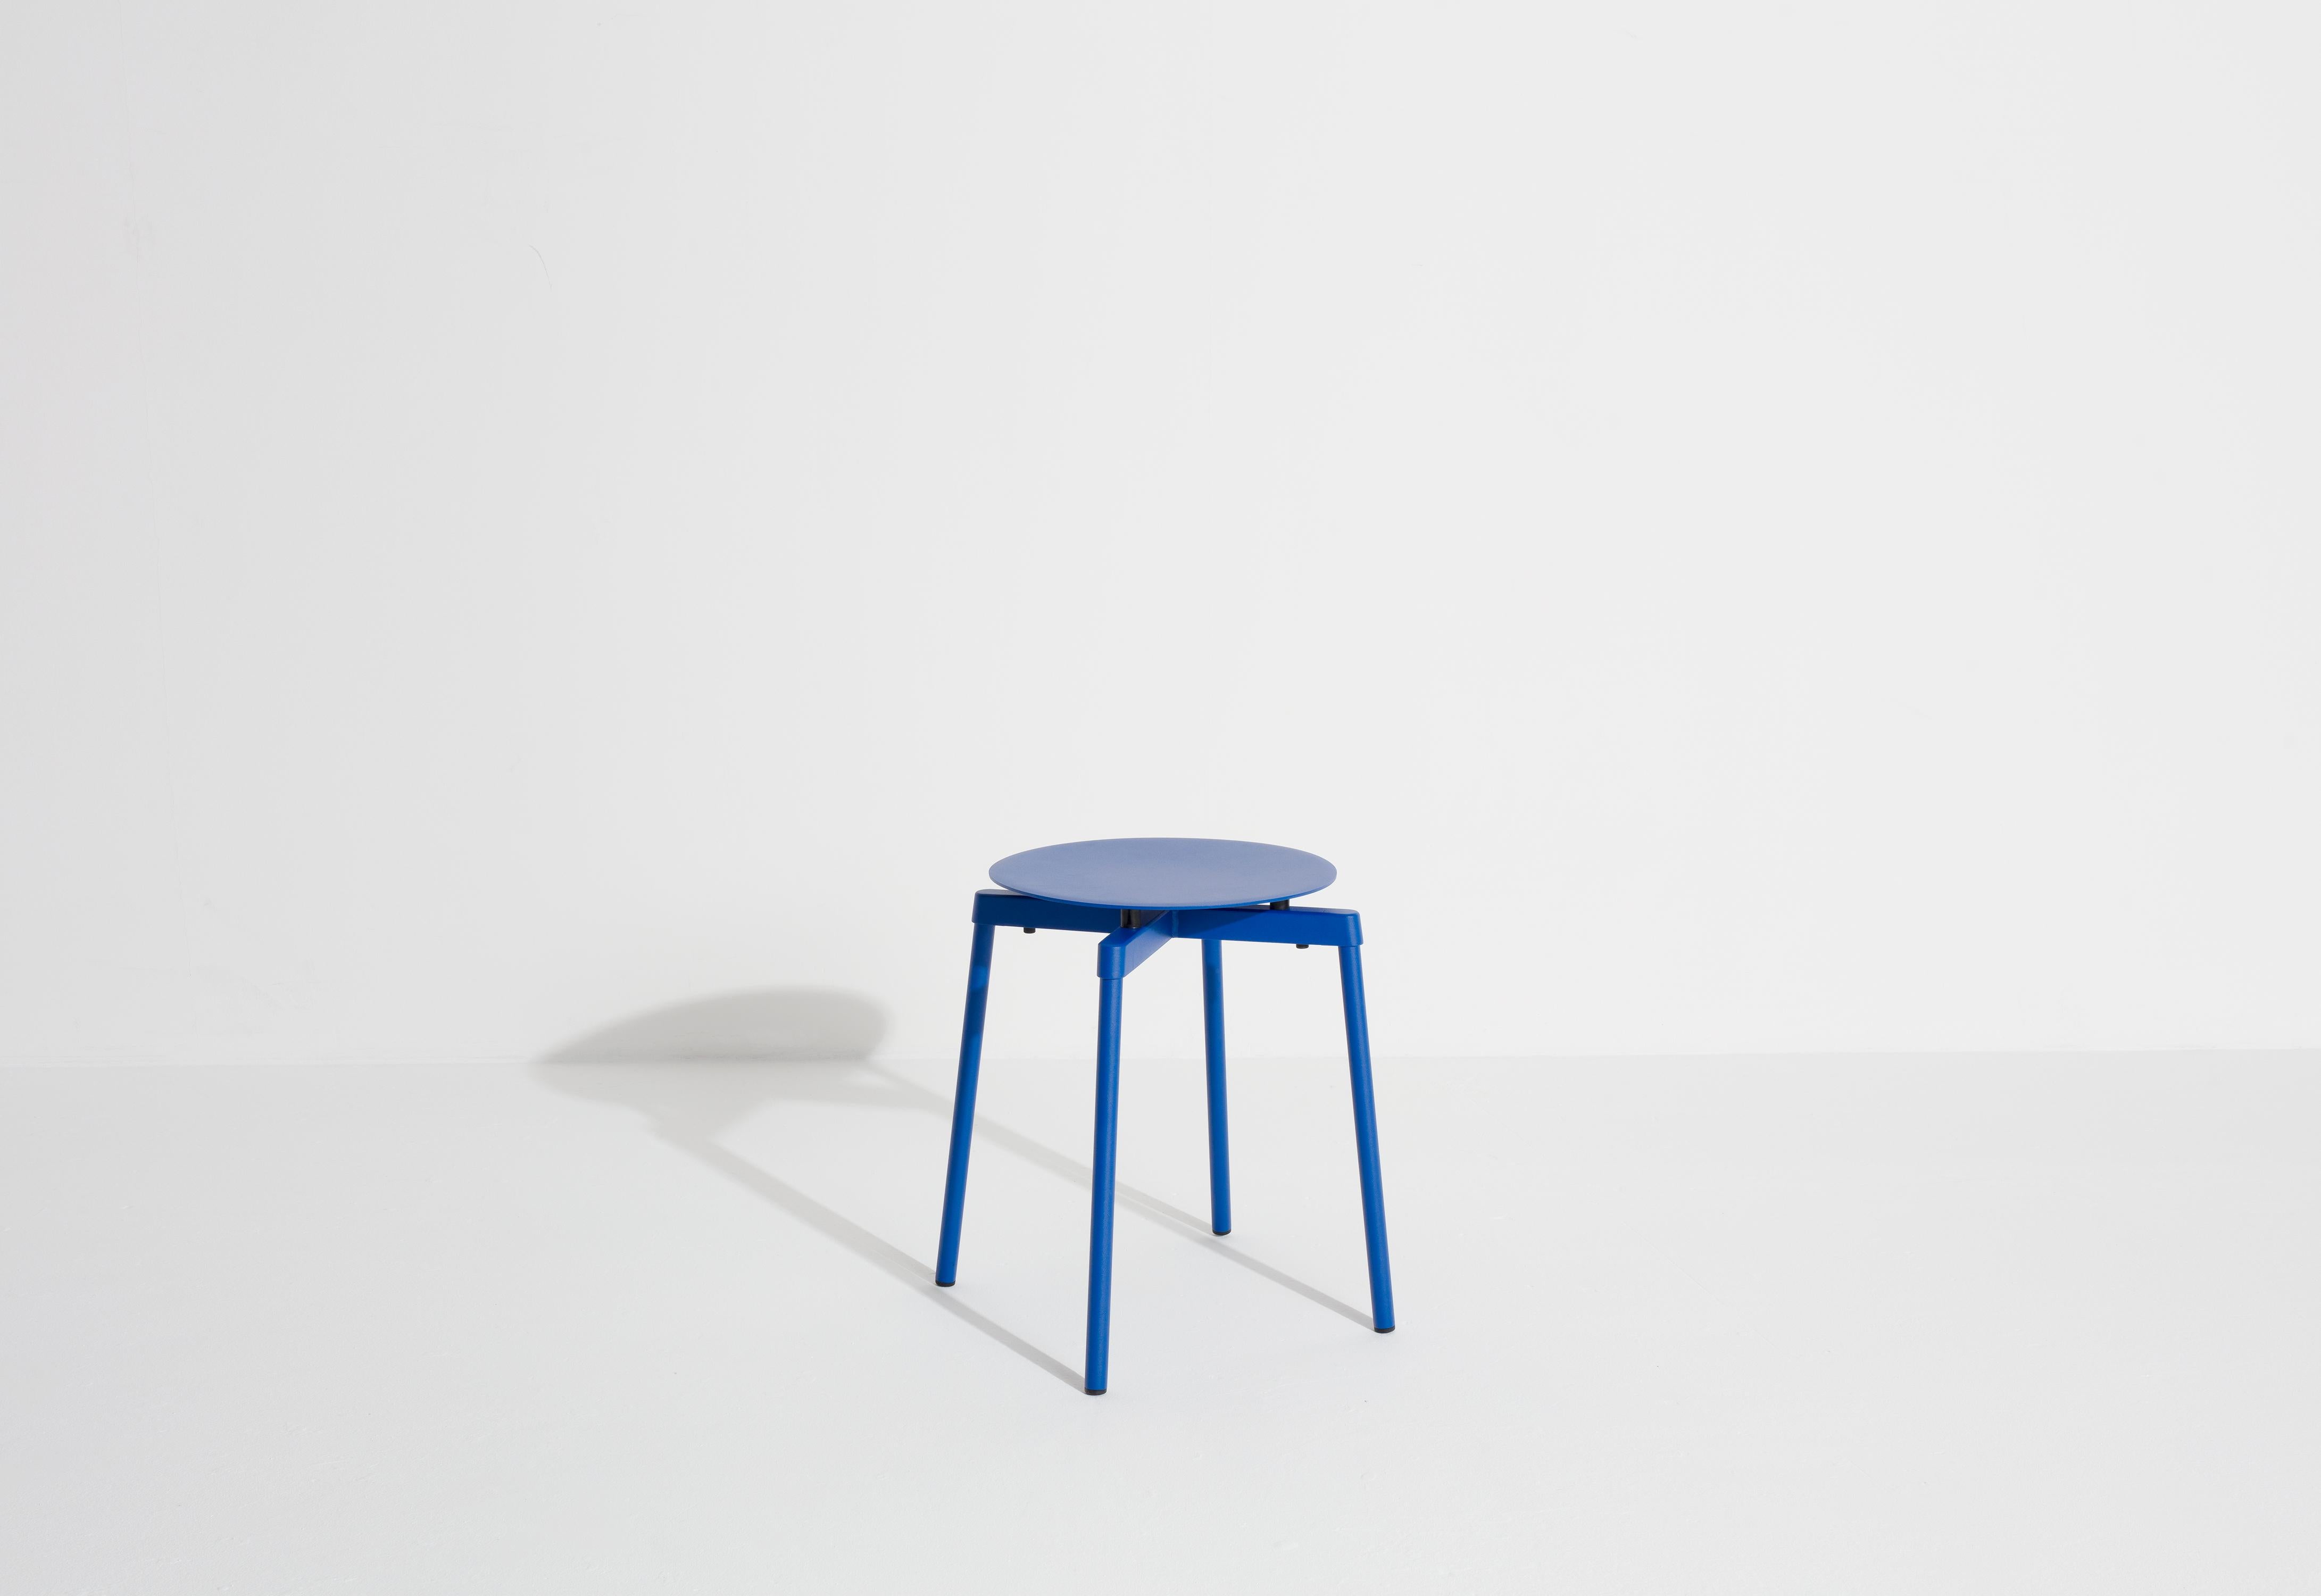 Chinese Petite Friture Fromme Stool in Blue Aluminium by Tom Chung, 2020 For Sale